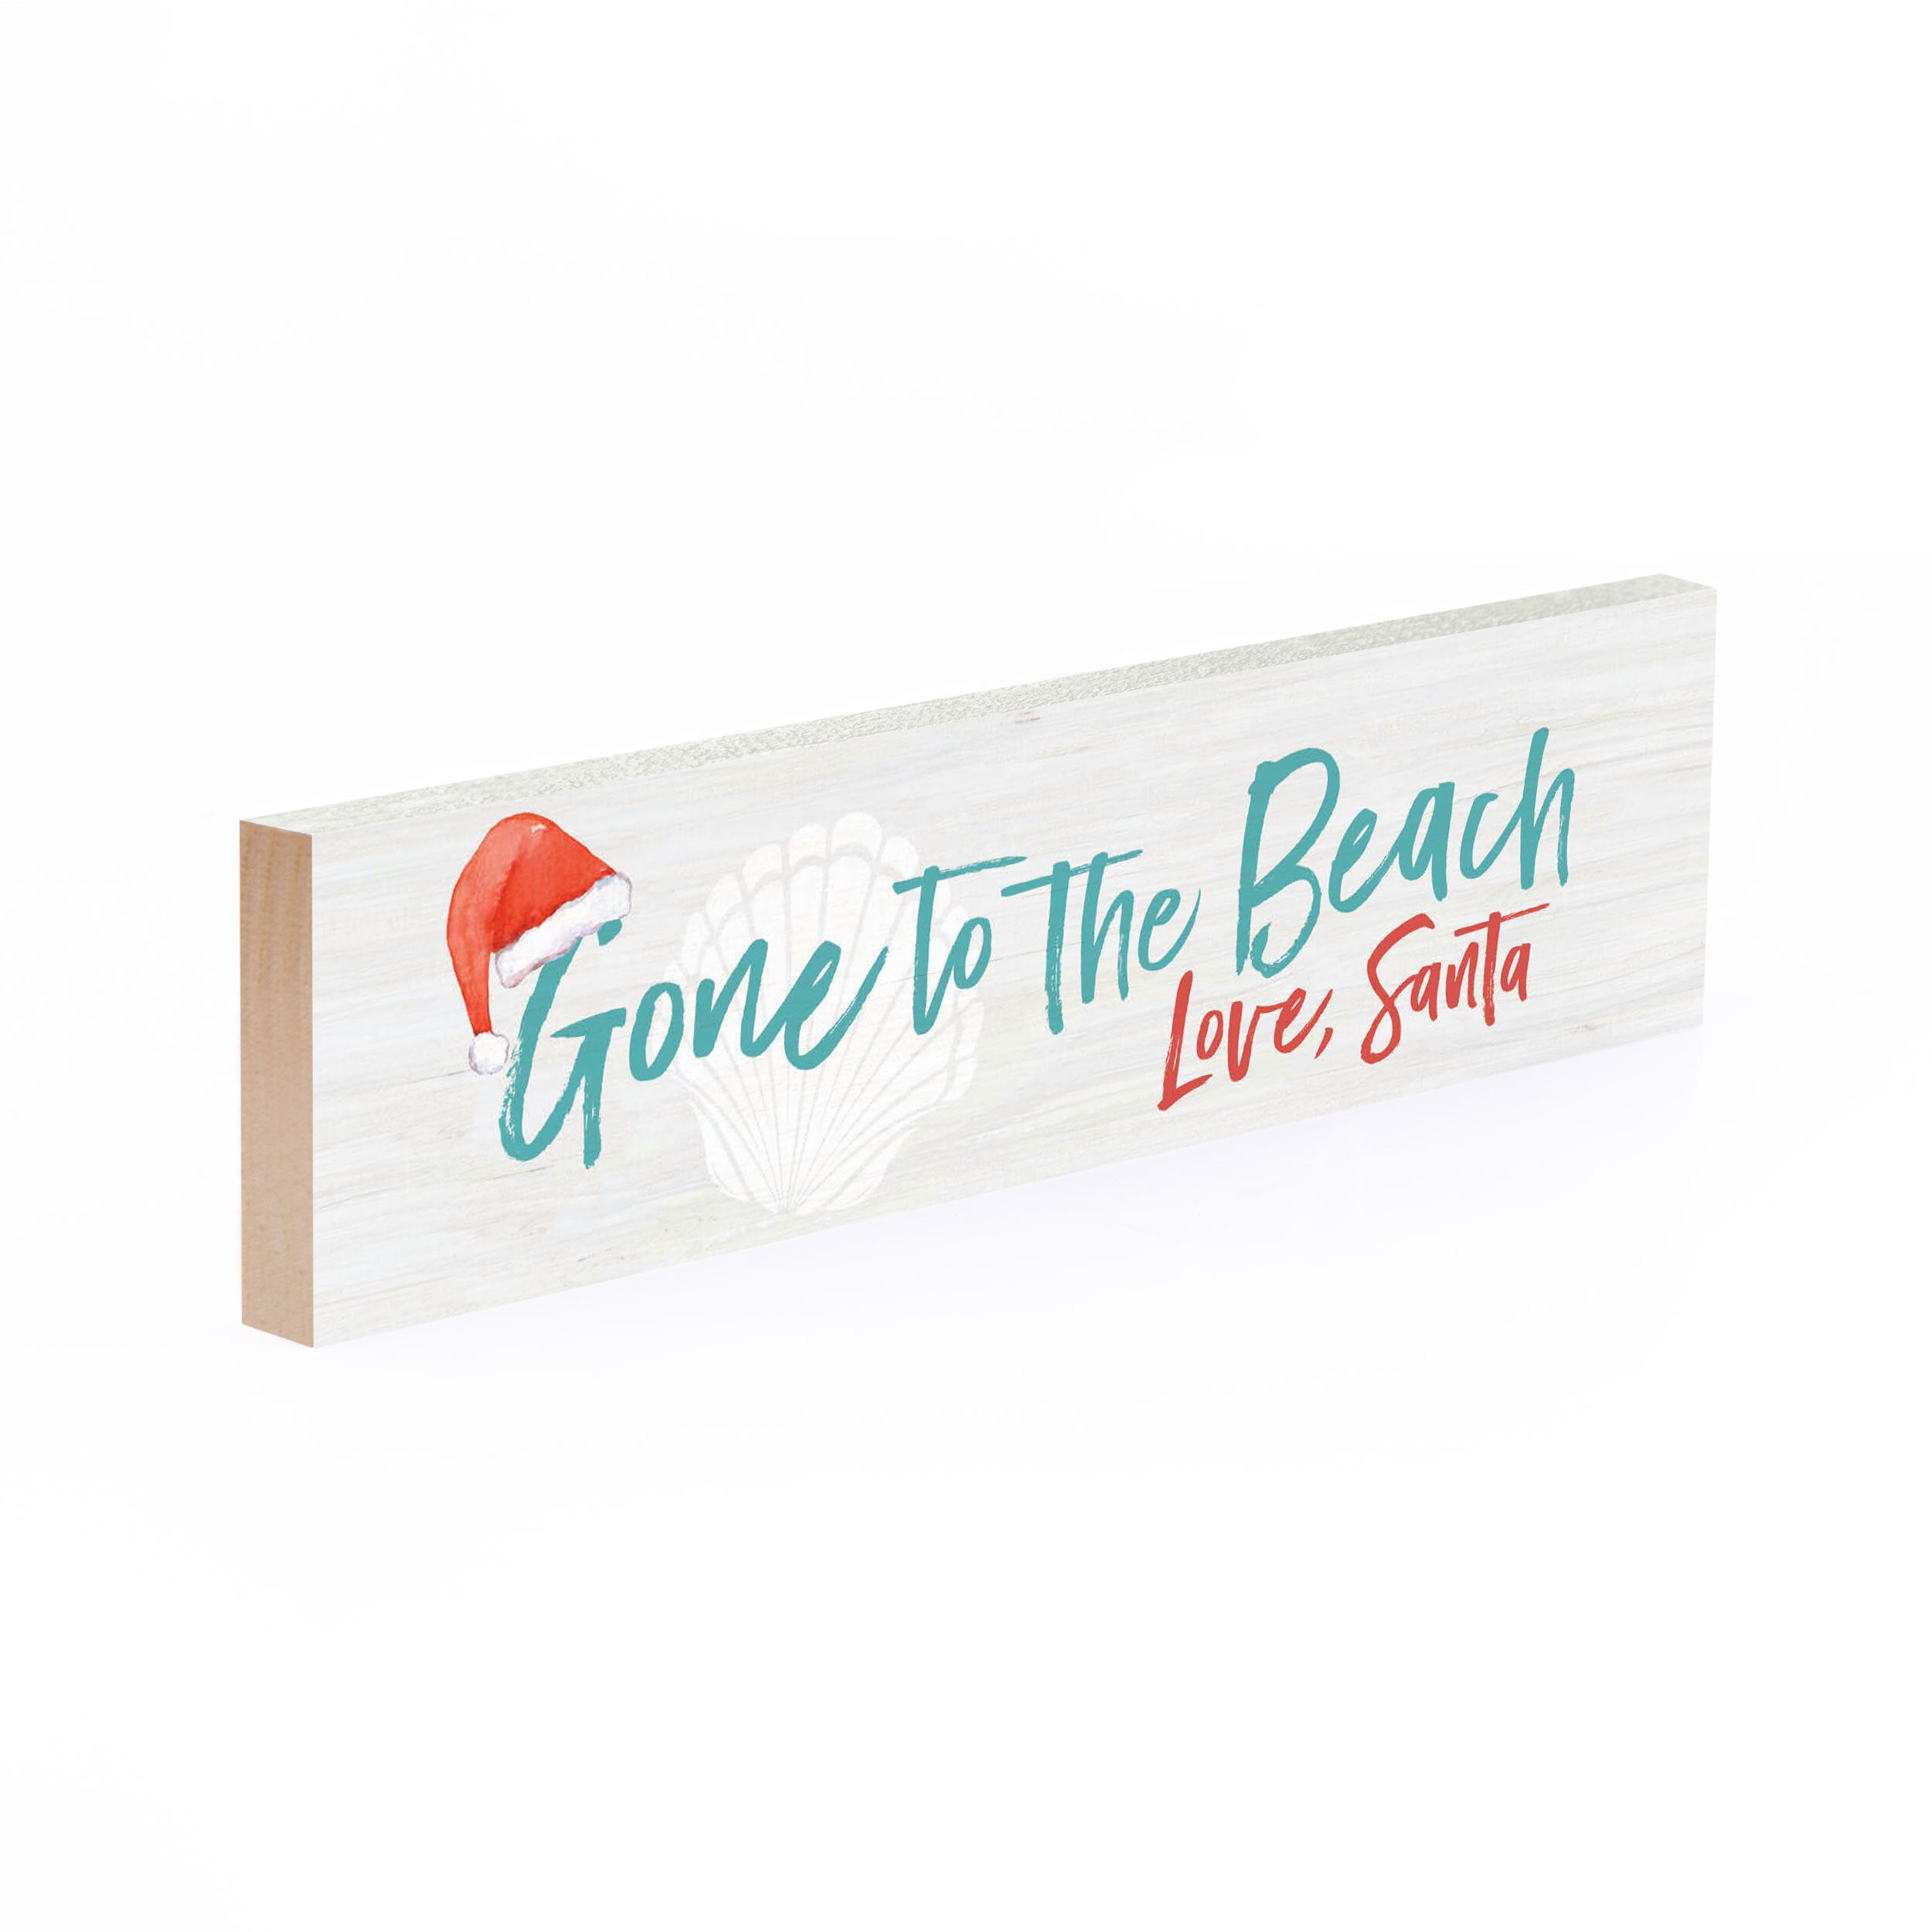 Gone To The Beach Love Santa Small Sign